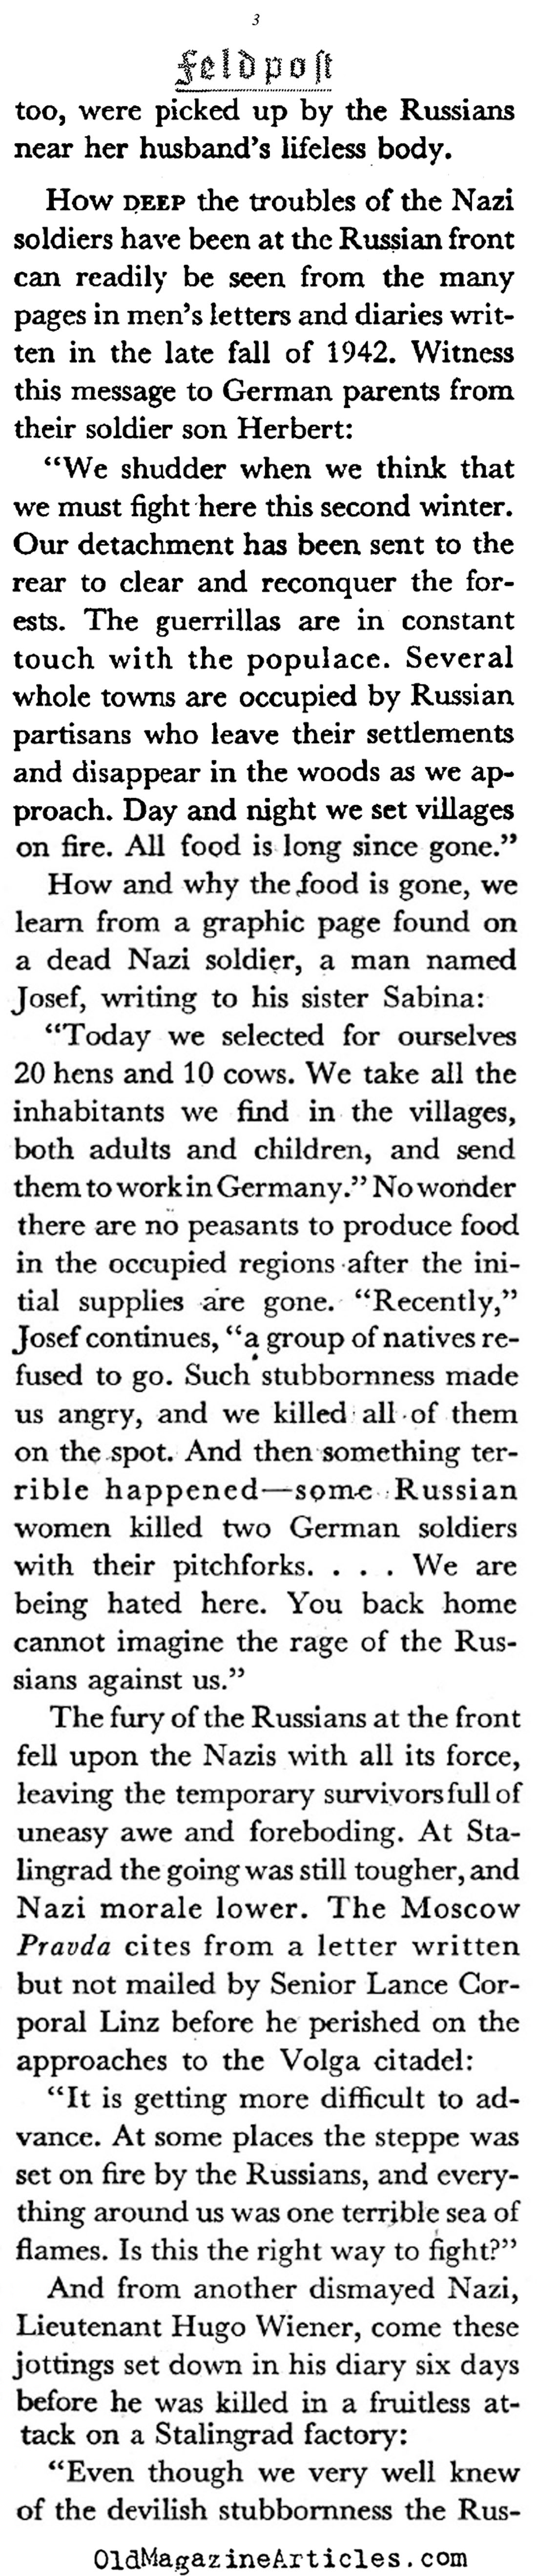 Letters from the German Home Front (Coronet Magazine, 1943)